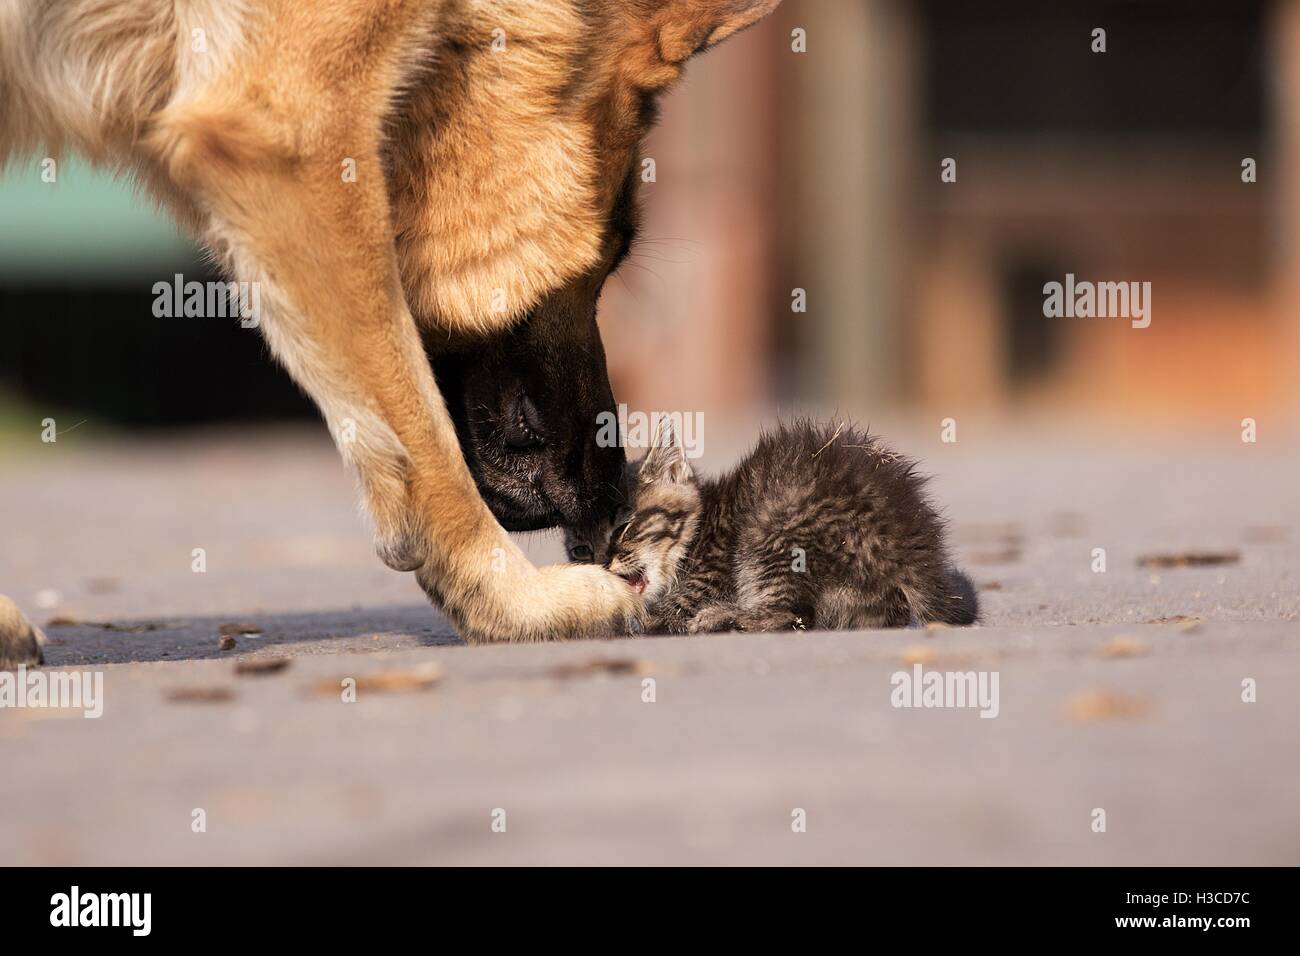 German shepherd taking care of young small cat Stock Photo